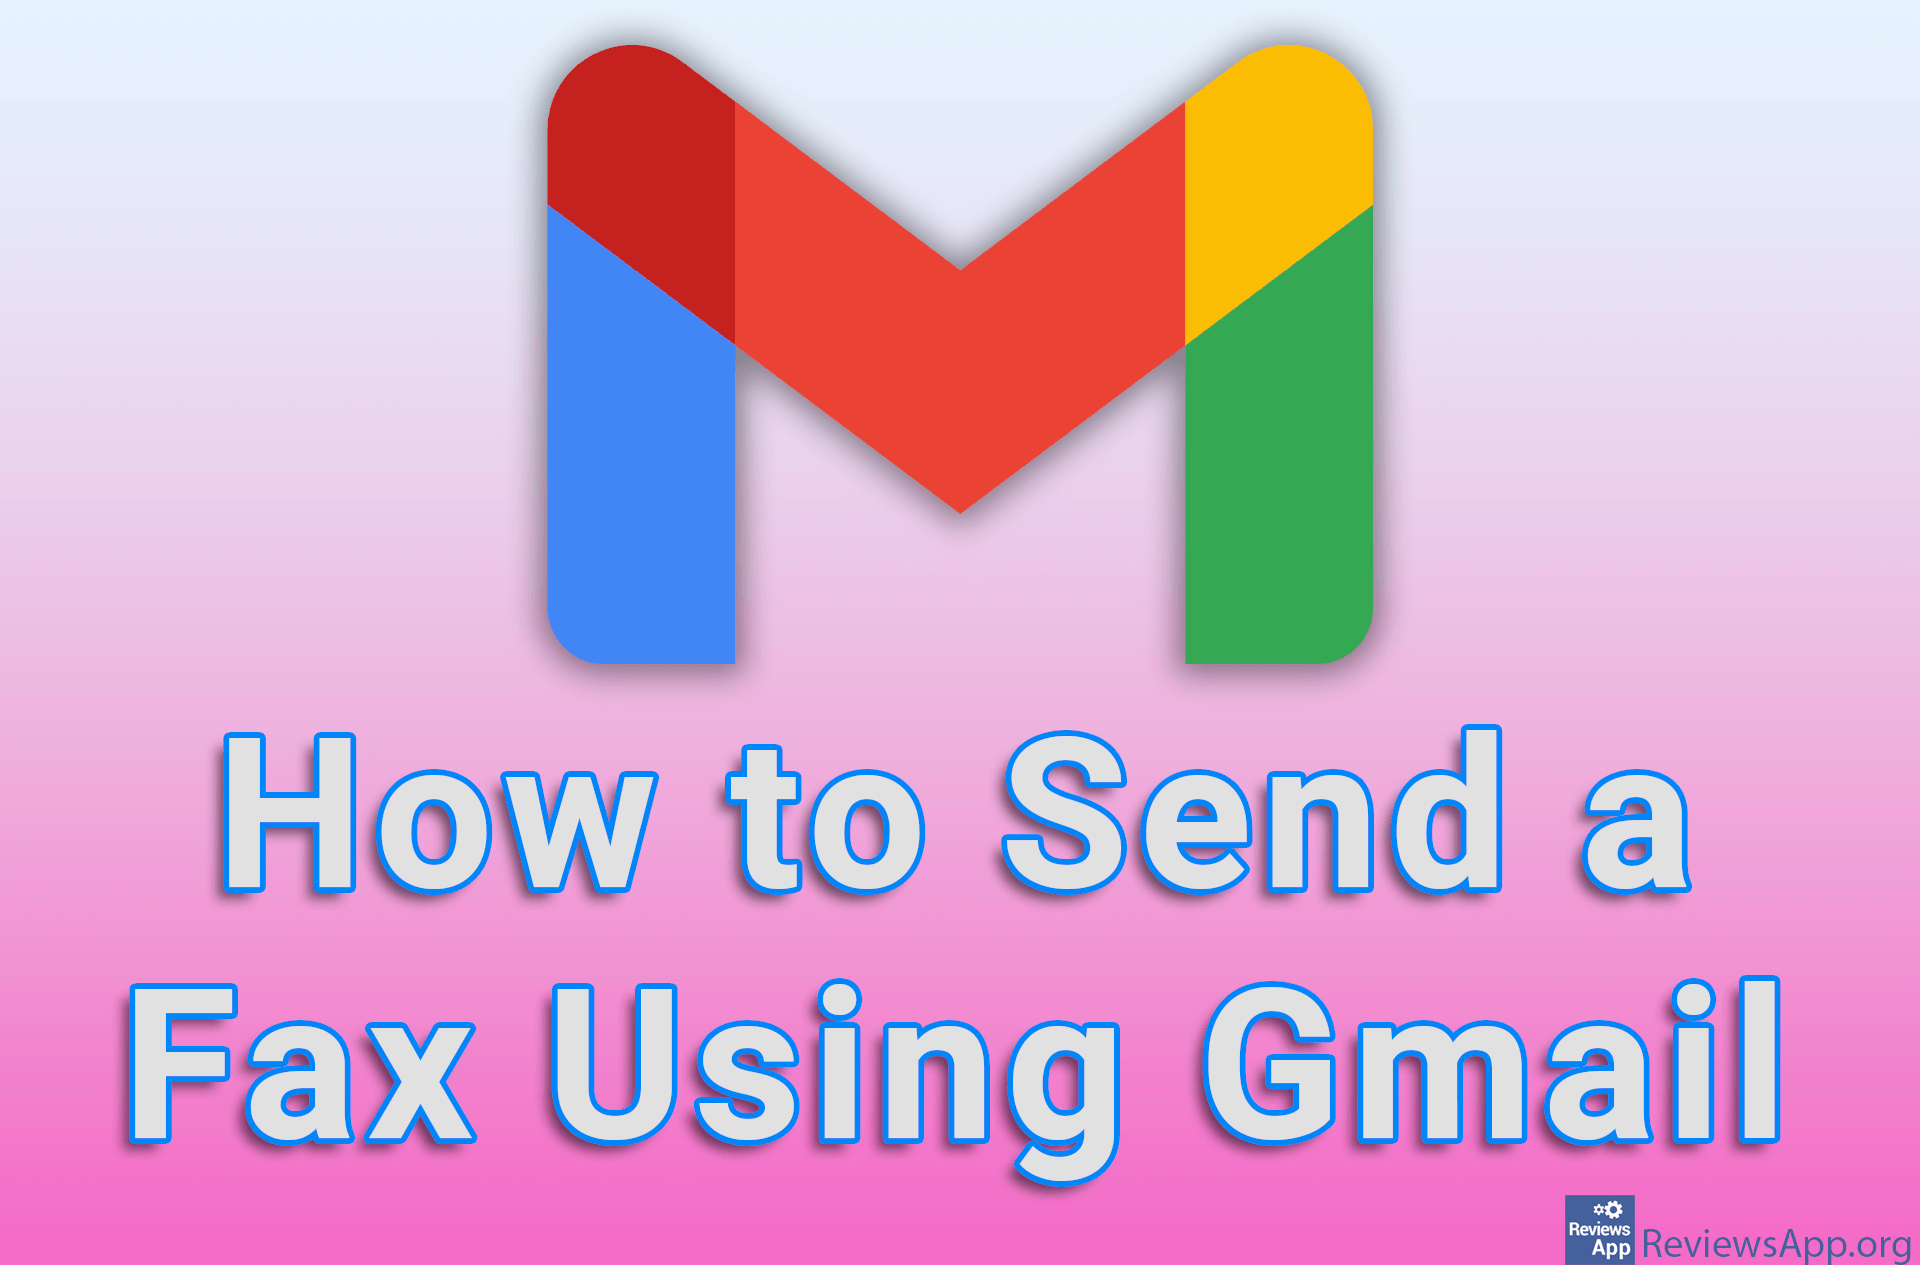 How to Send a Fax Using Gmail